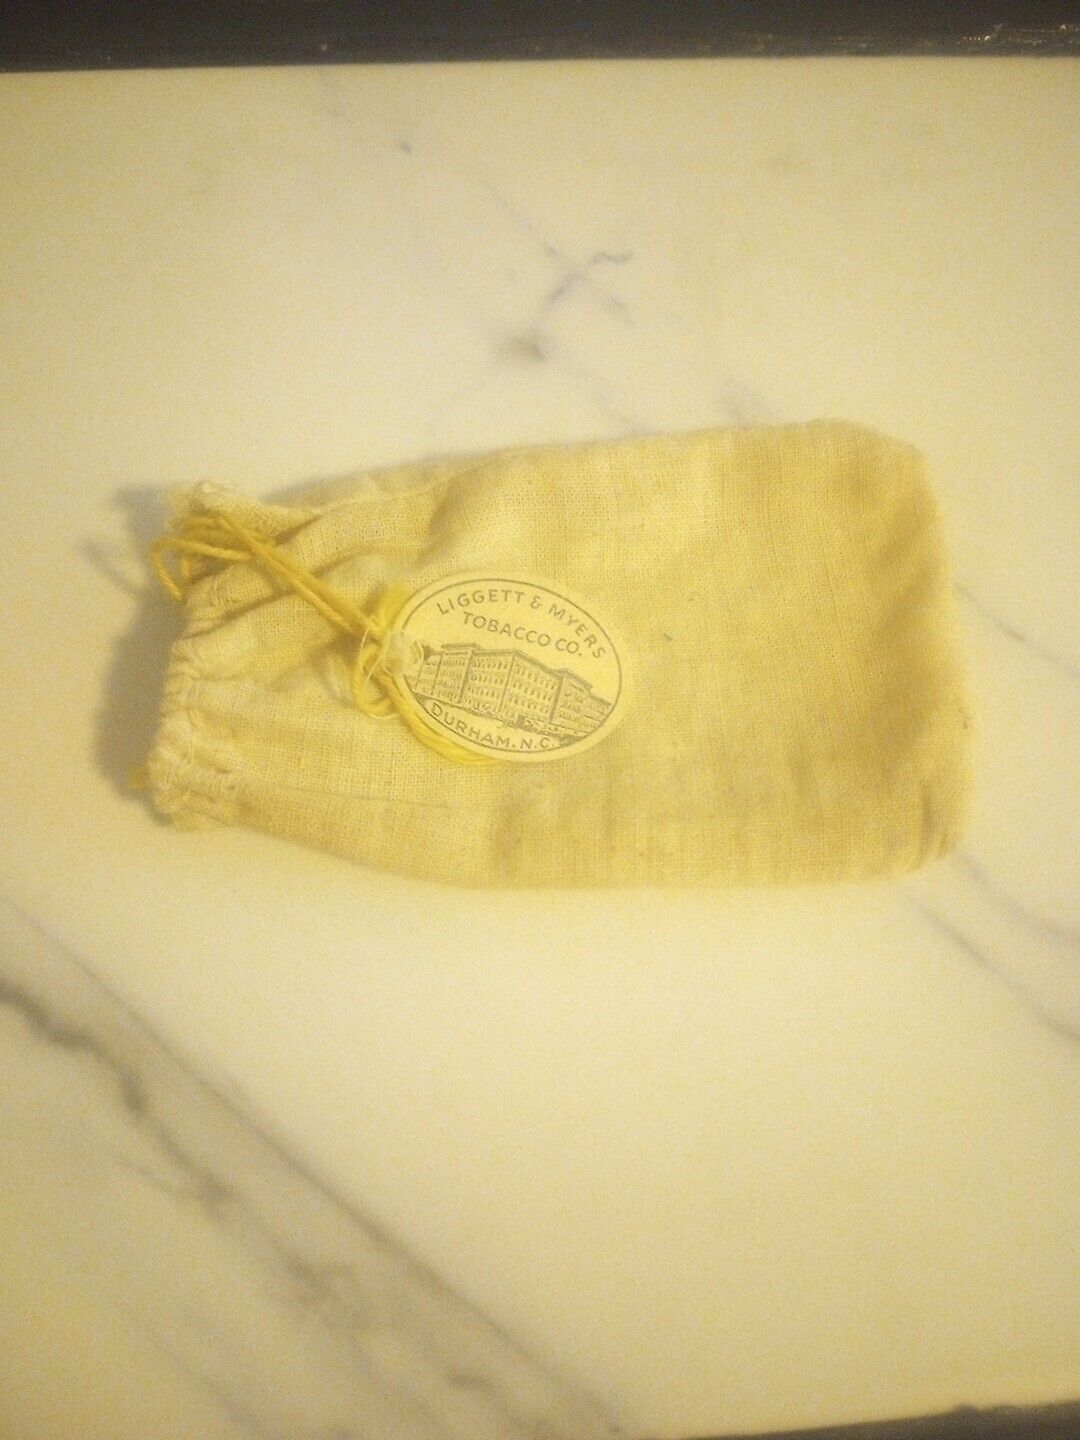 liggett and myers Tobacco Bag 